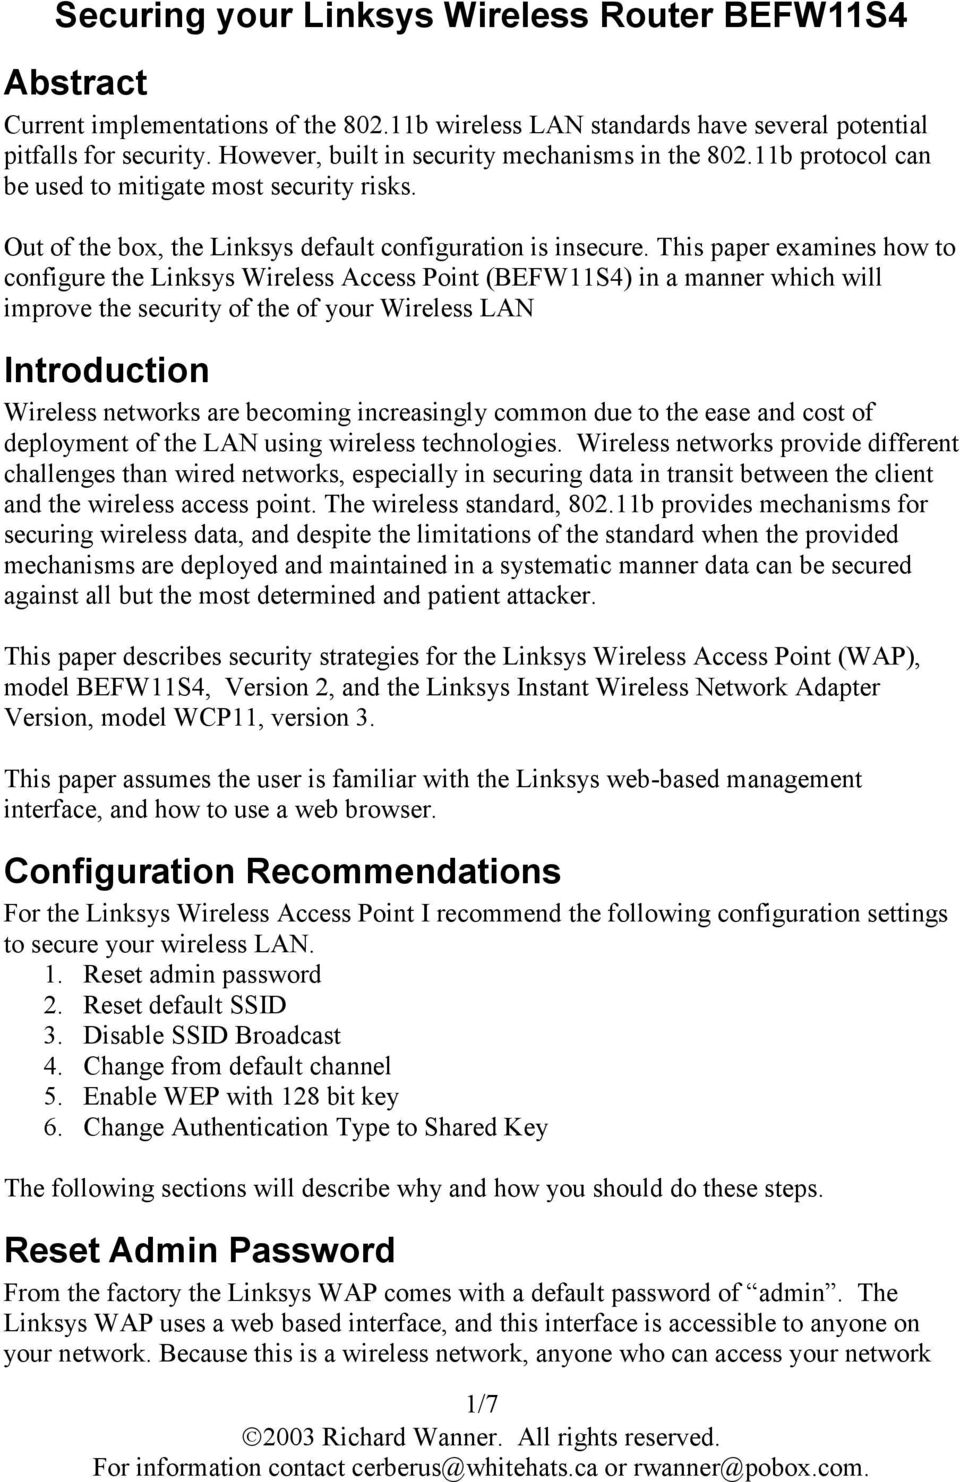 This paper examines how to configure the Linksys Wireless Access Point (BEFW11S4) in a manner which will improve the security of the of your Wireless LAN Introduction Wireless networks are becoming